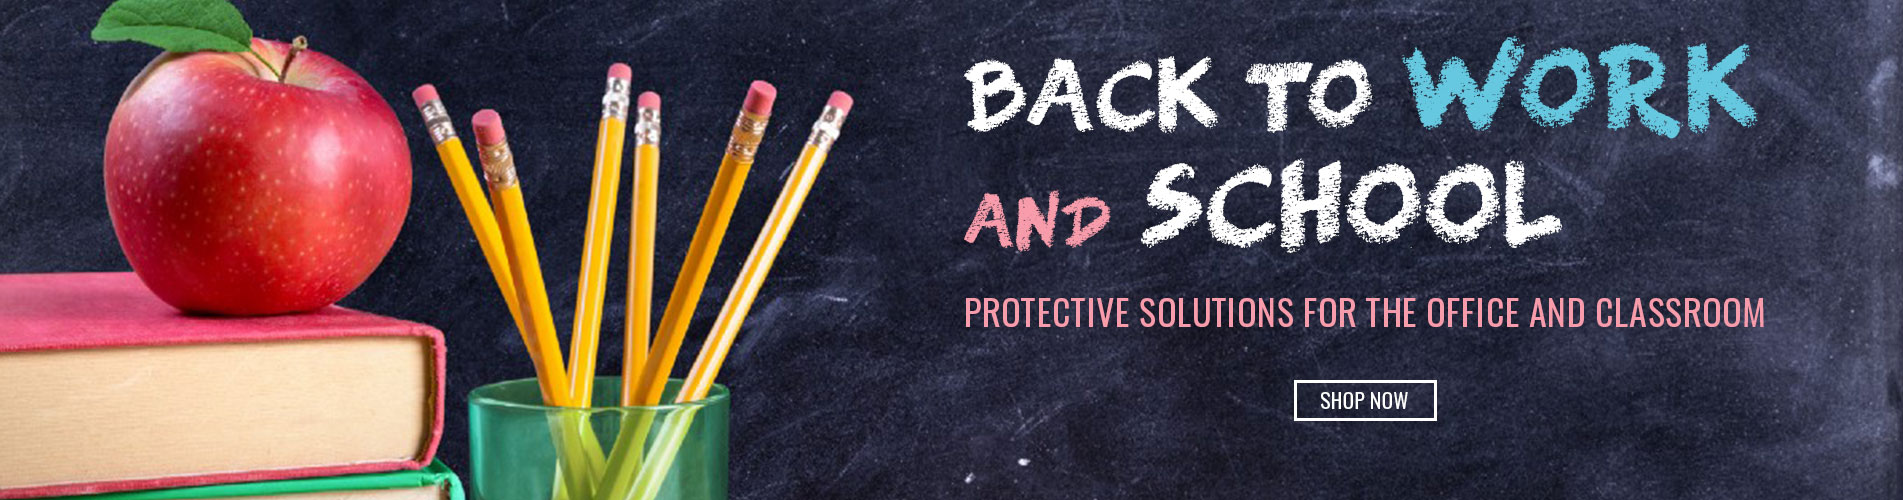 Protective Solutions for The Office and Classroom